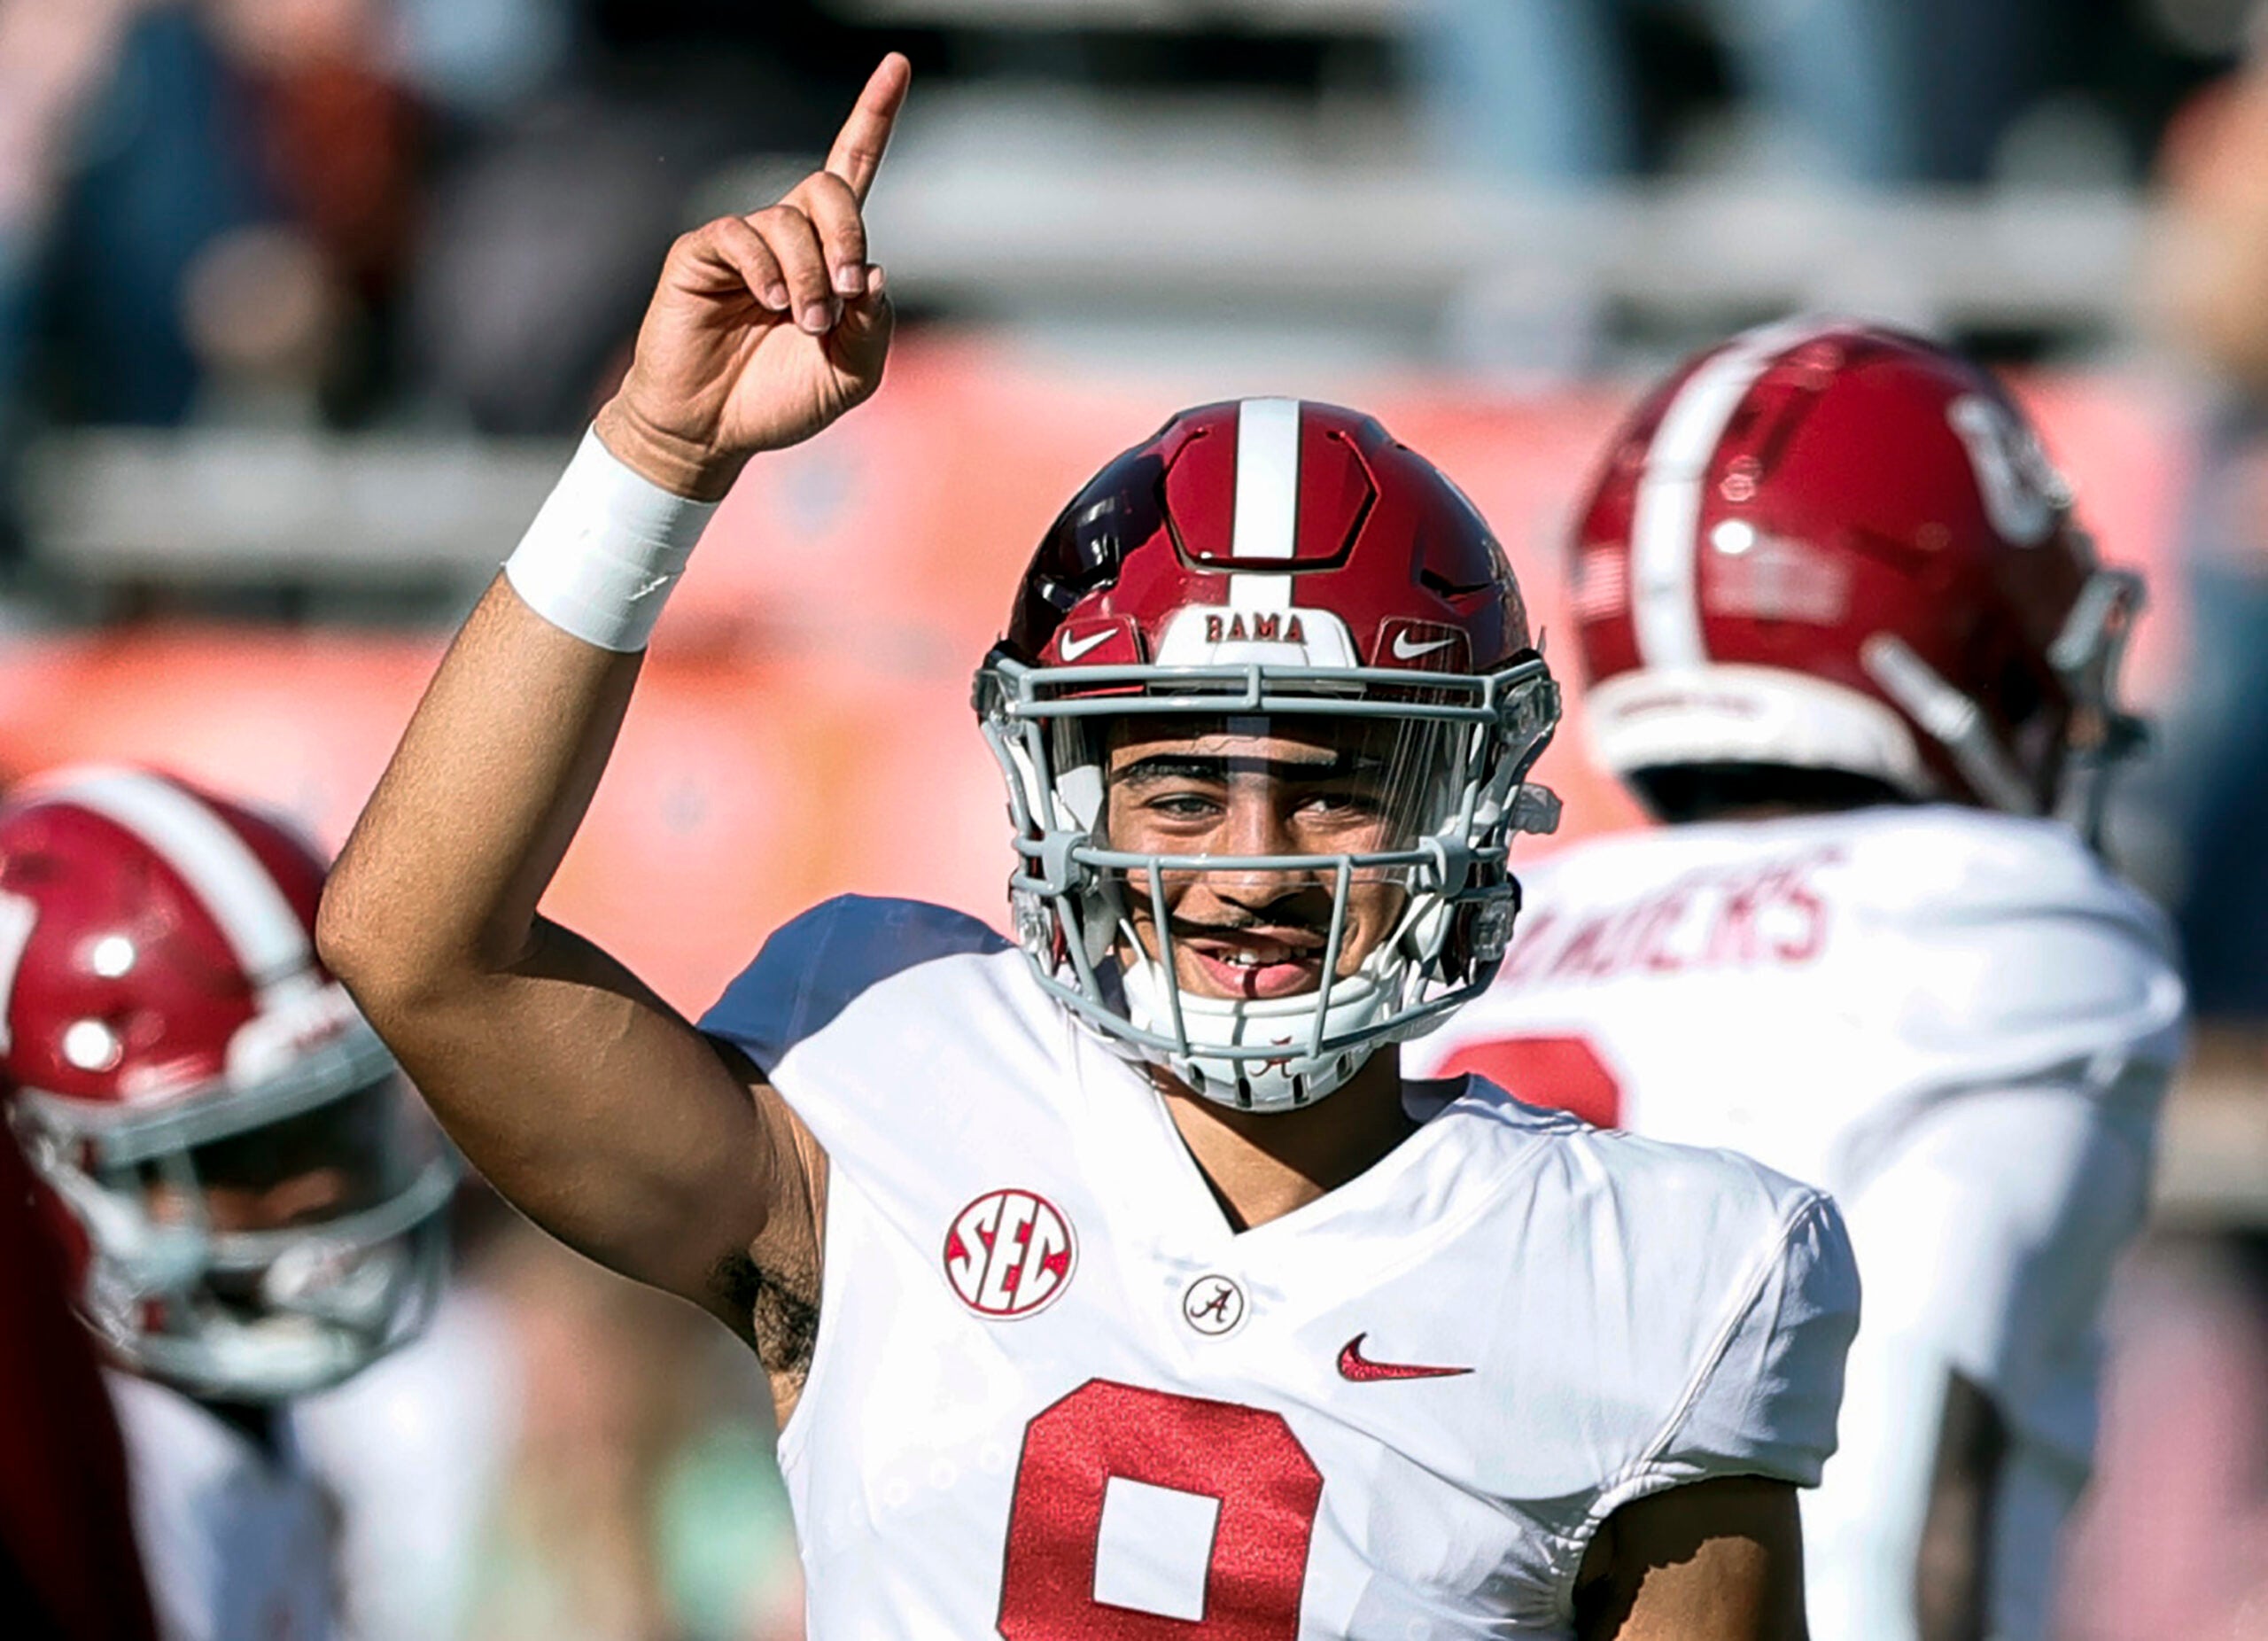 Alabama quarterback Bryce Young (9) during warm ups before the start of an NCAA college football game against Auburn Saturday, Nov. 27, 2021, in Auburn, Ala.